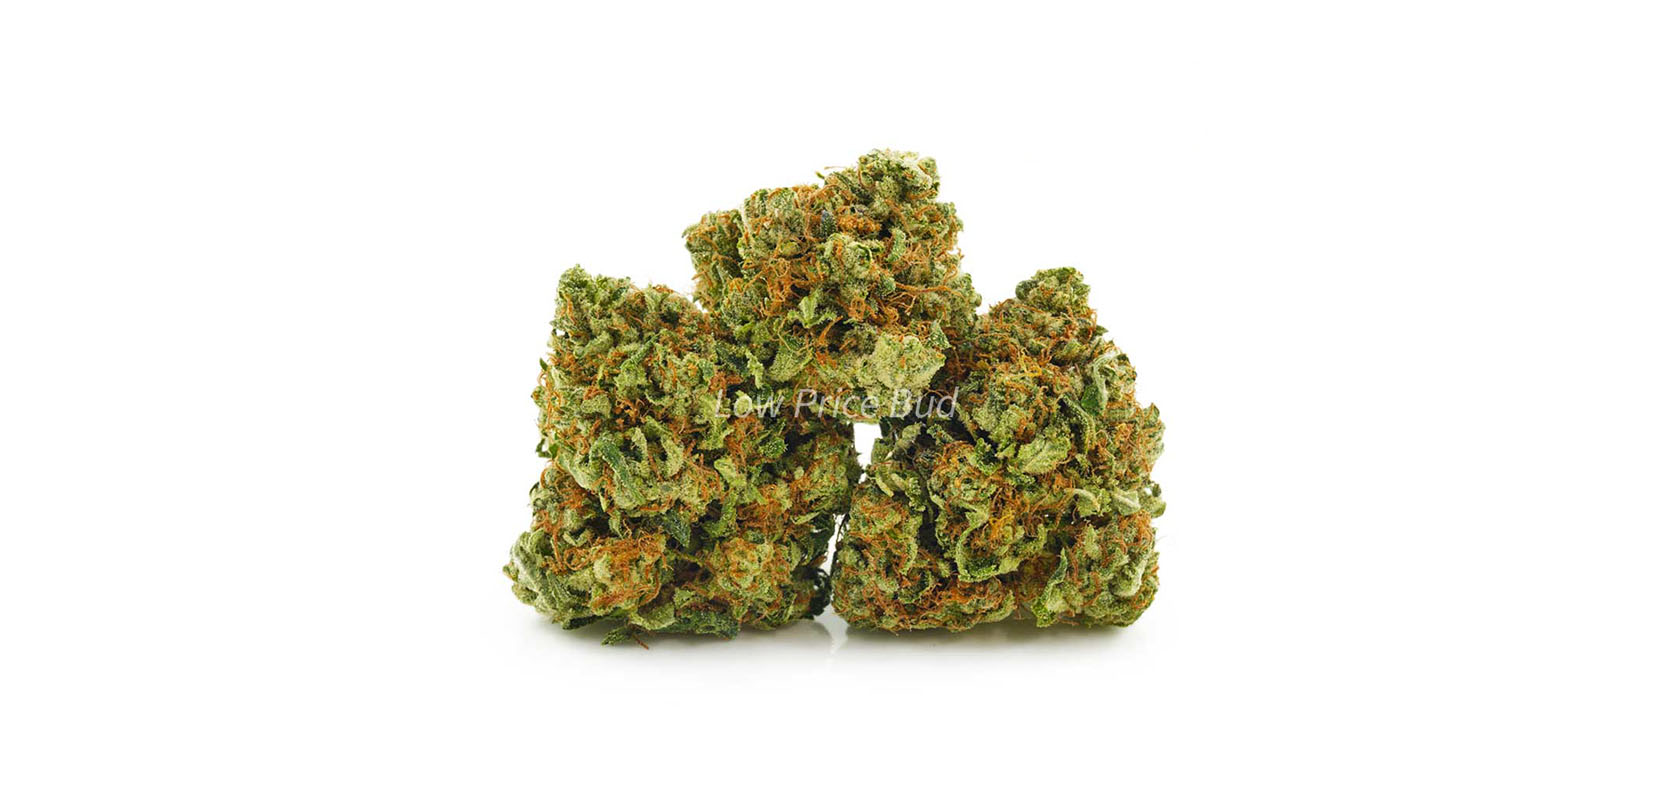 Cherry Punch weed online Canada at Low Price Bud dispensary for value buds and BC cannabis. buy online weeds. cheapweed.